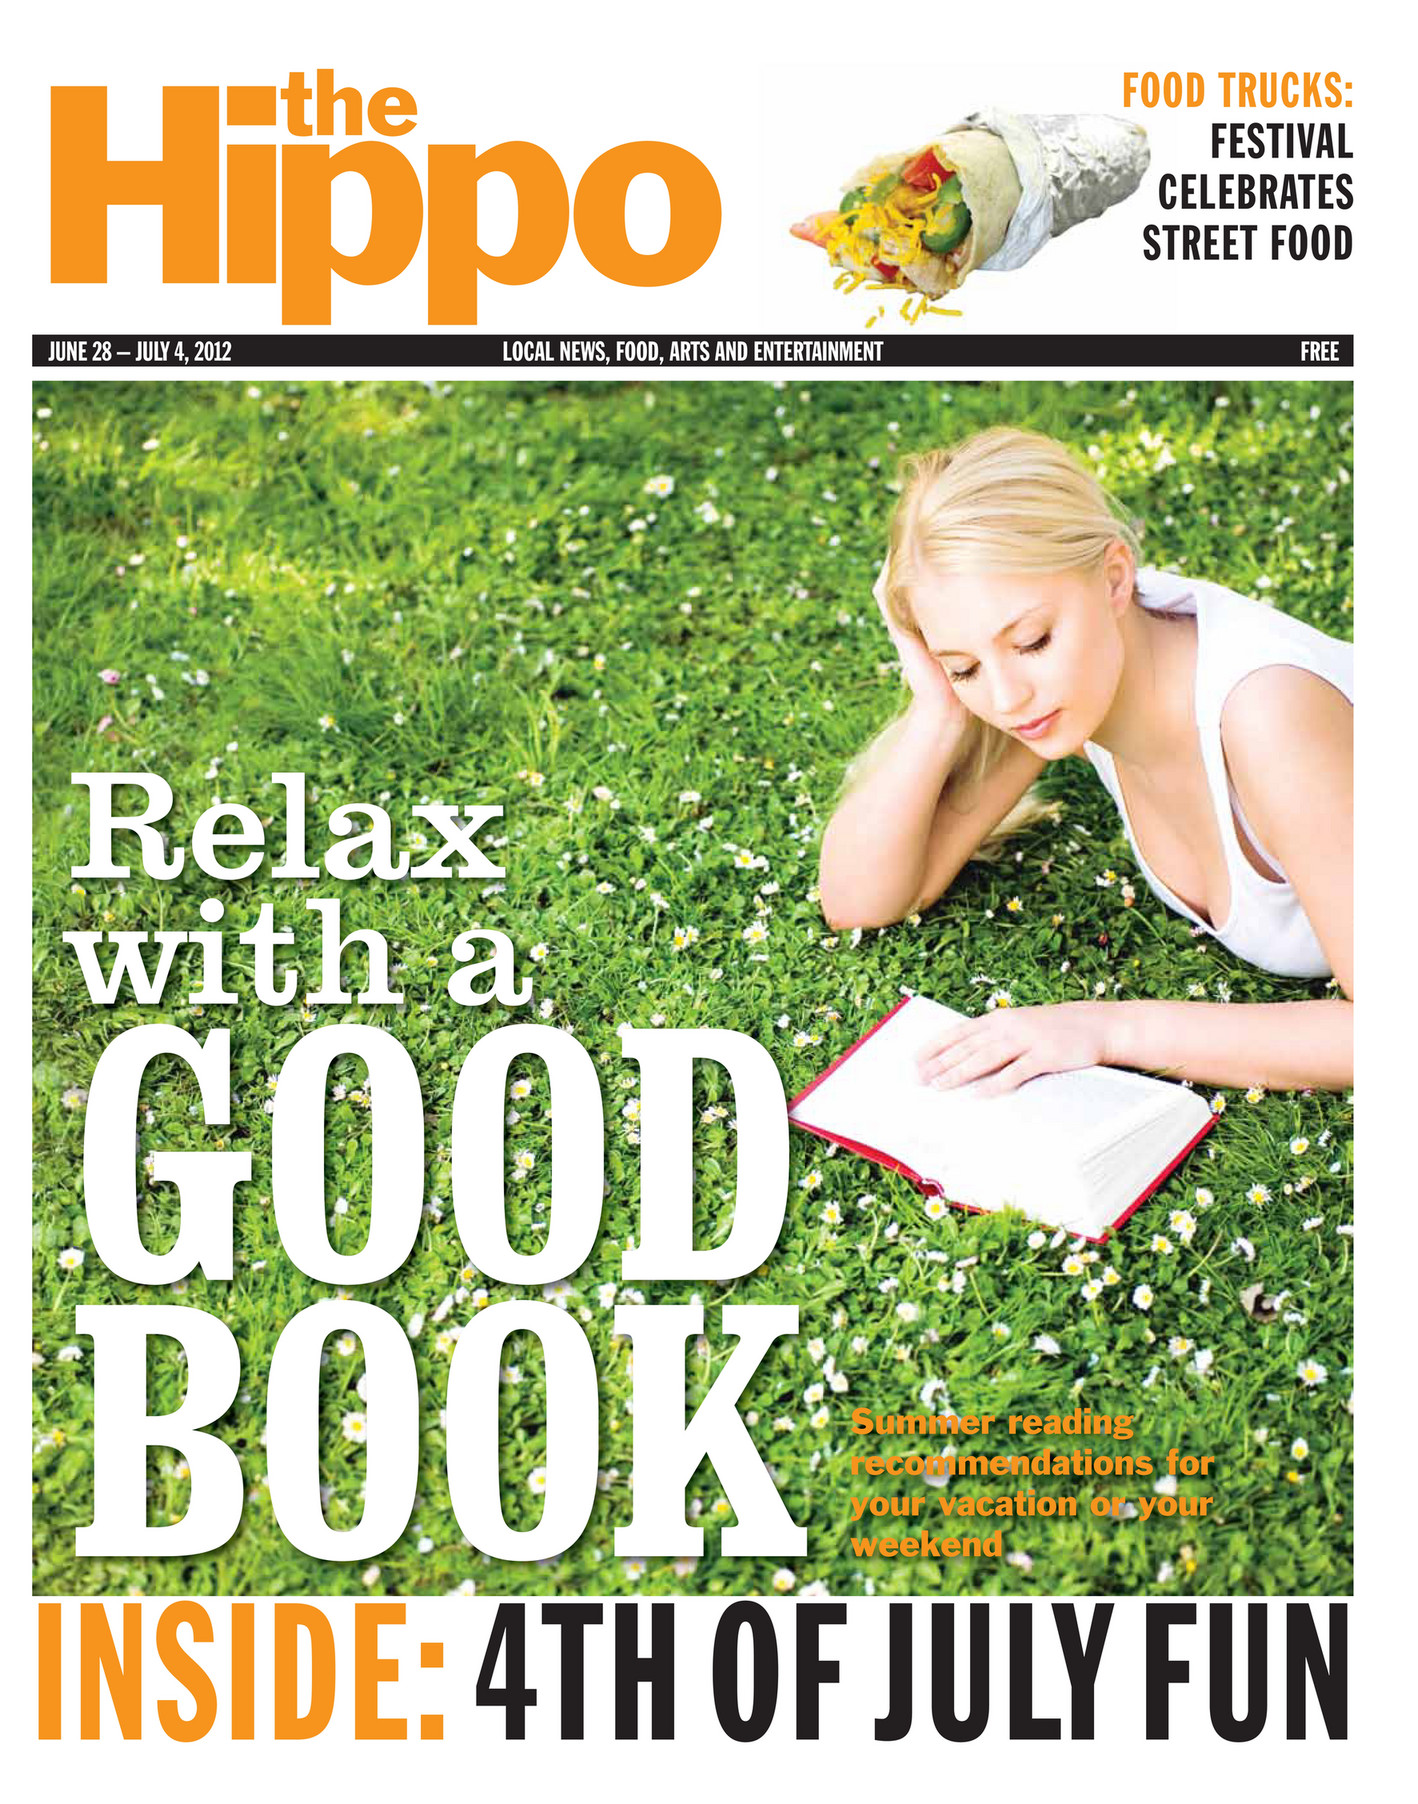 Hippo Press The Hippo June 28, 2012 Page 1 Created with